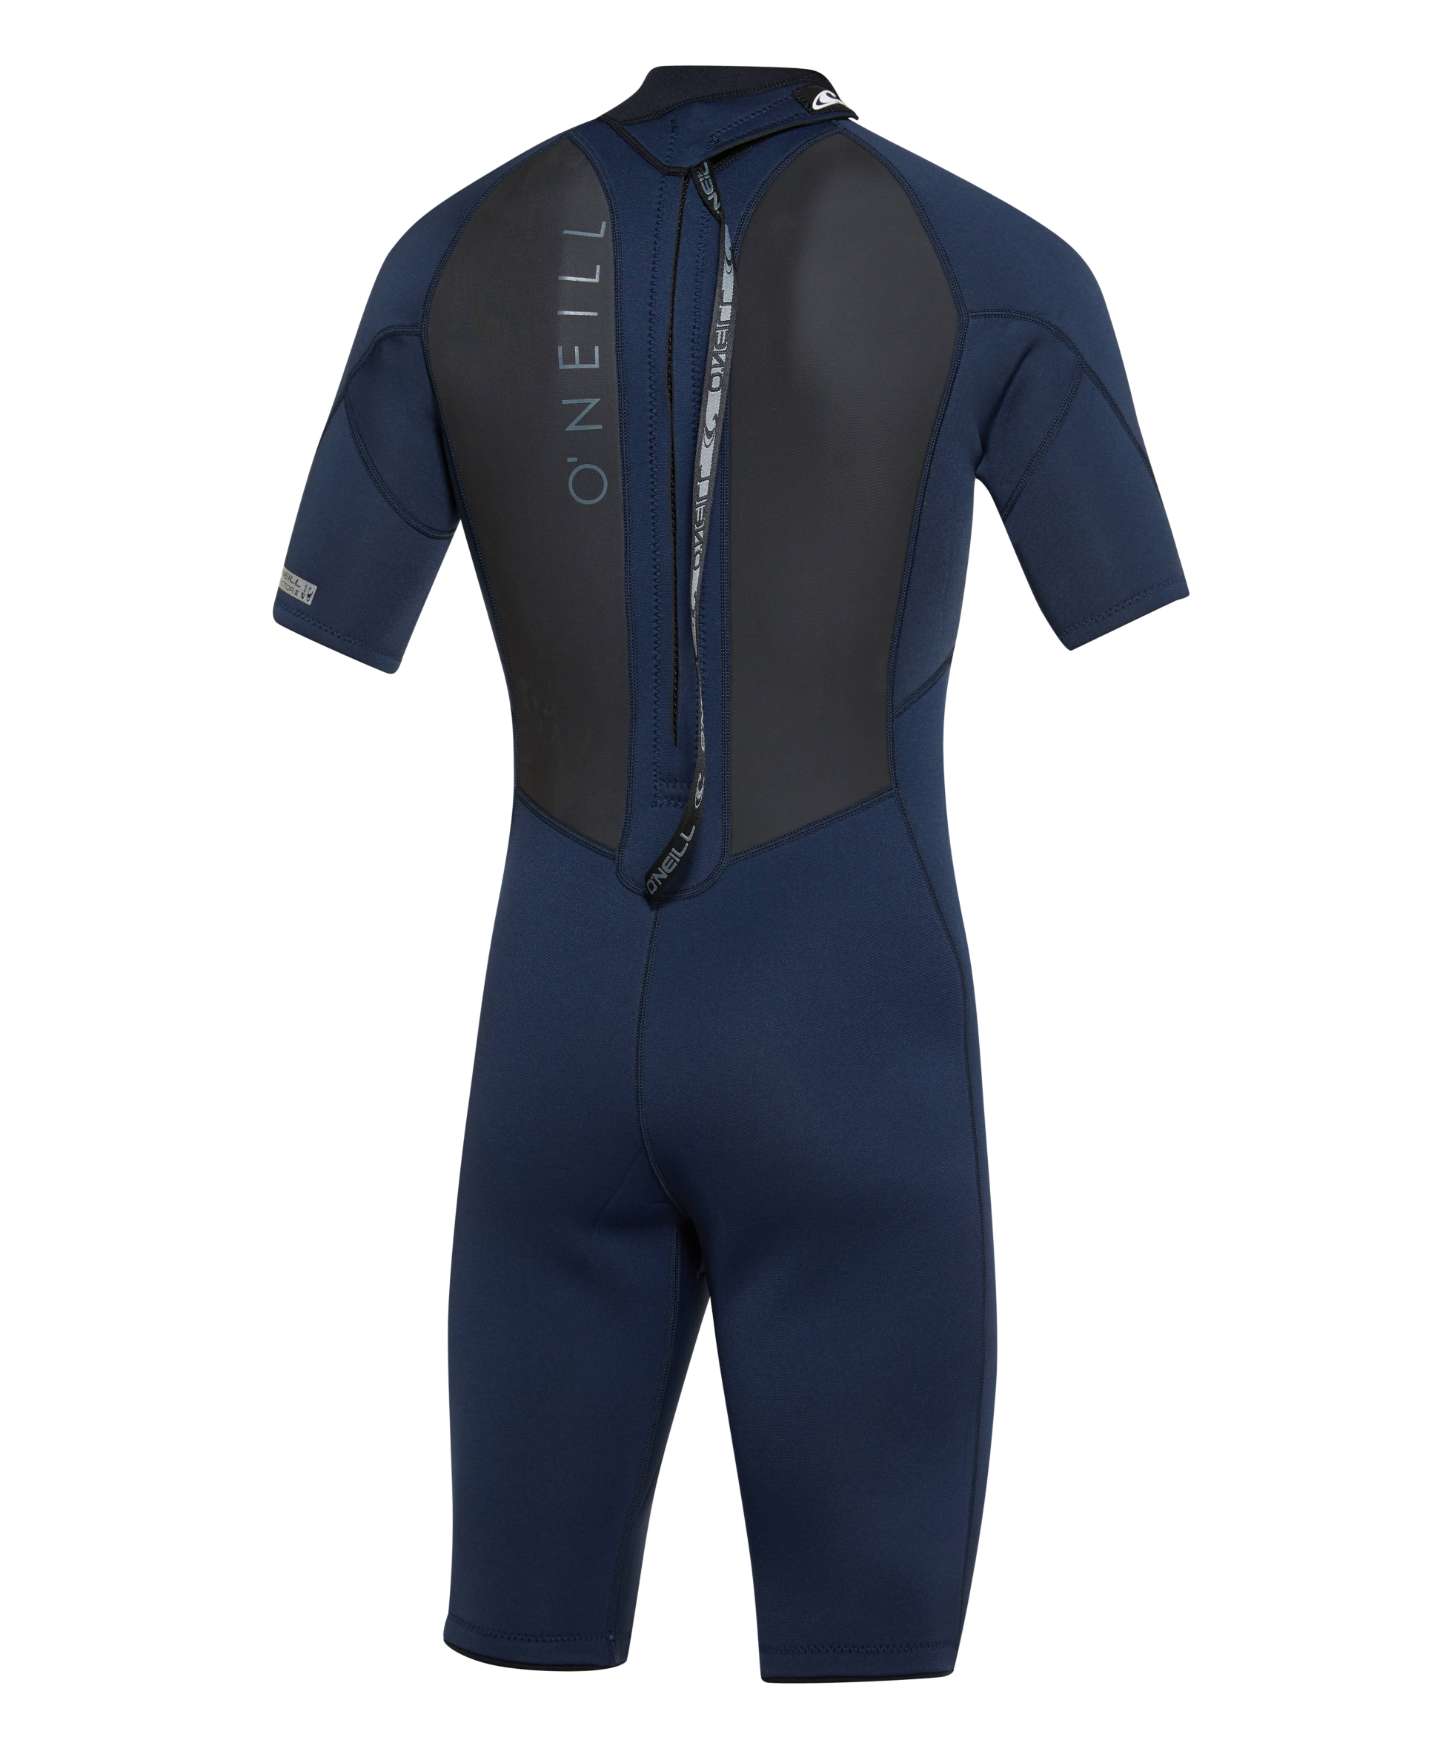 O'NEILL - Reactor 2mm SS Spring Wetsuit - Abyss/Abyss